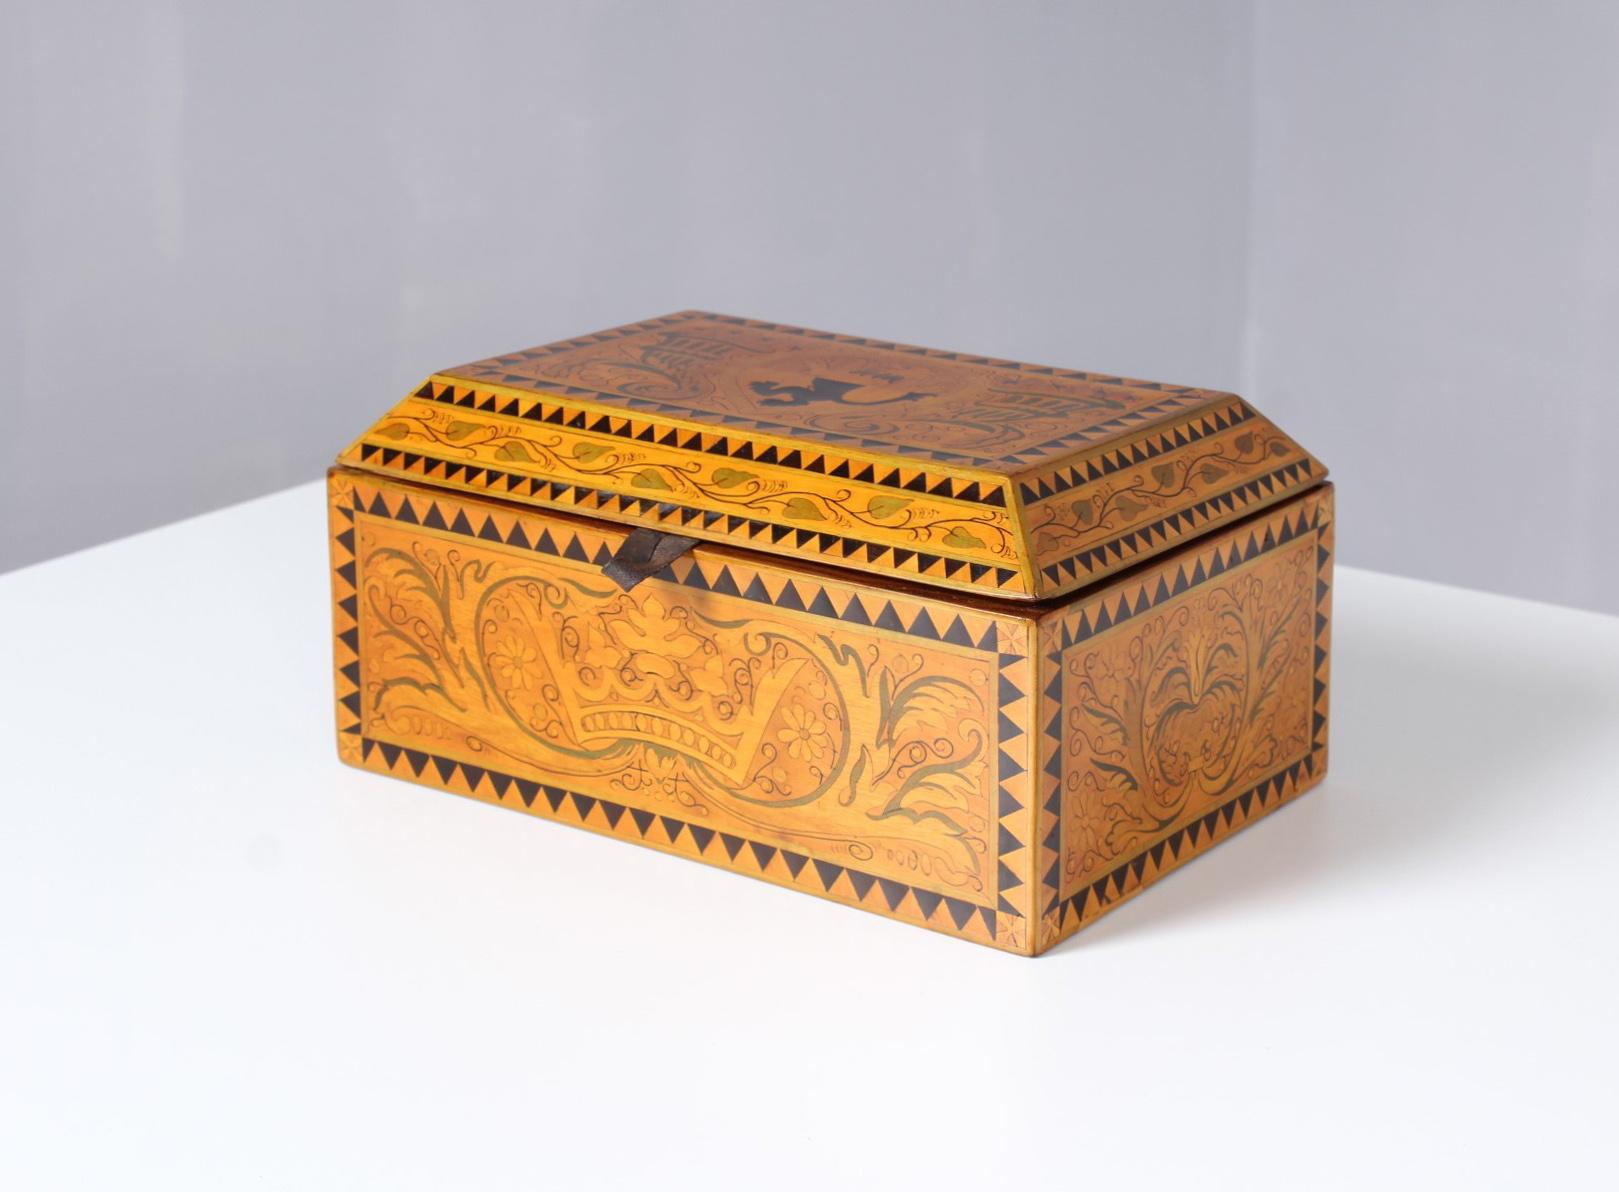 Inlaid jewelry box

Germany
Various precious woods
Historism around 1900

Dimensions: H x W x D: 14 x 27 x 19 cm

Antique jewelry box with very carefully laid marquetry.
All sides are framed with light-dark contrasting fillet bands.
The